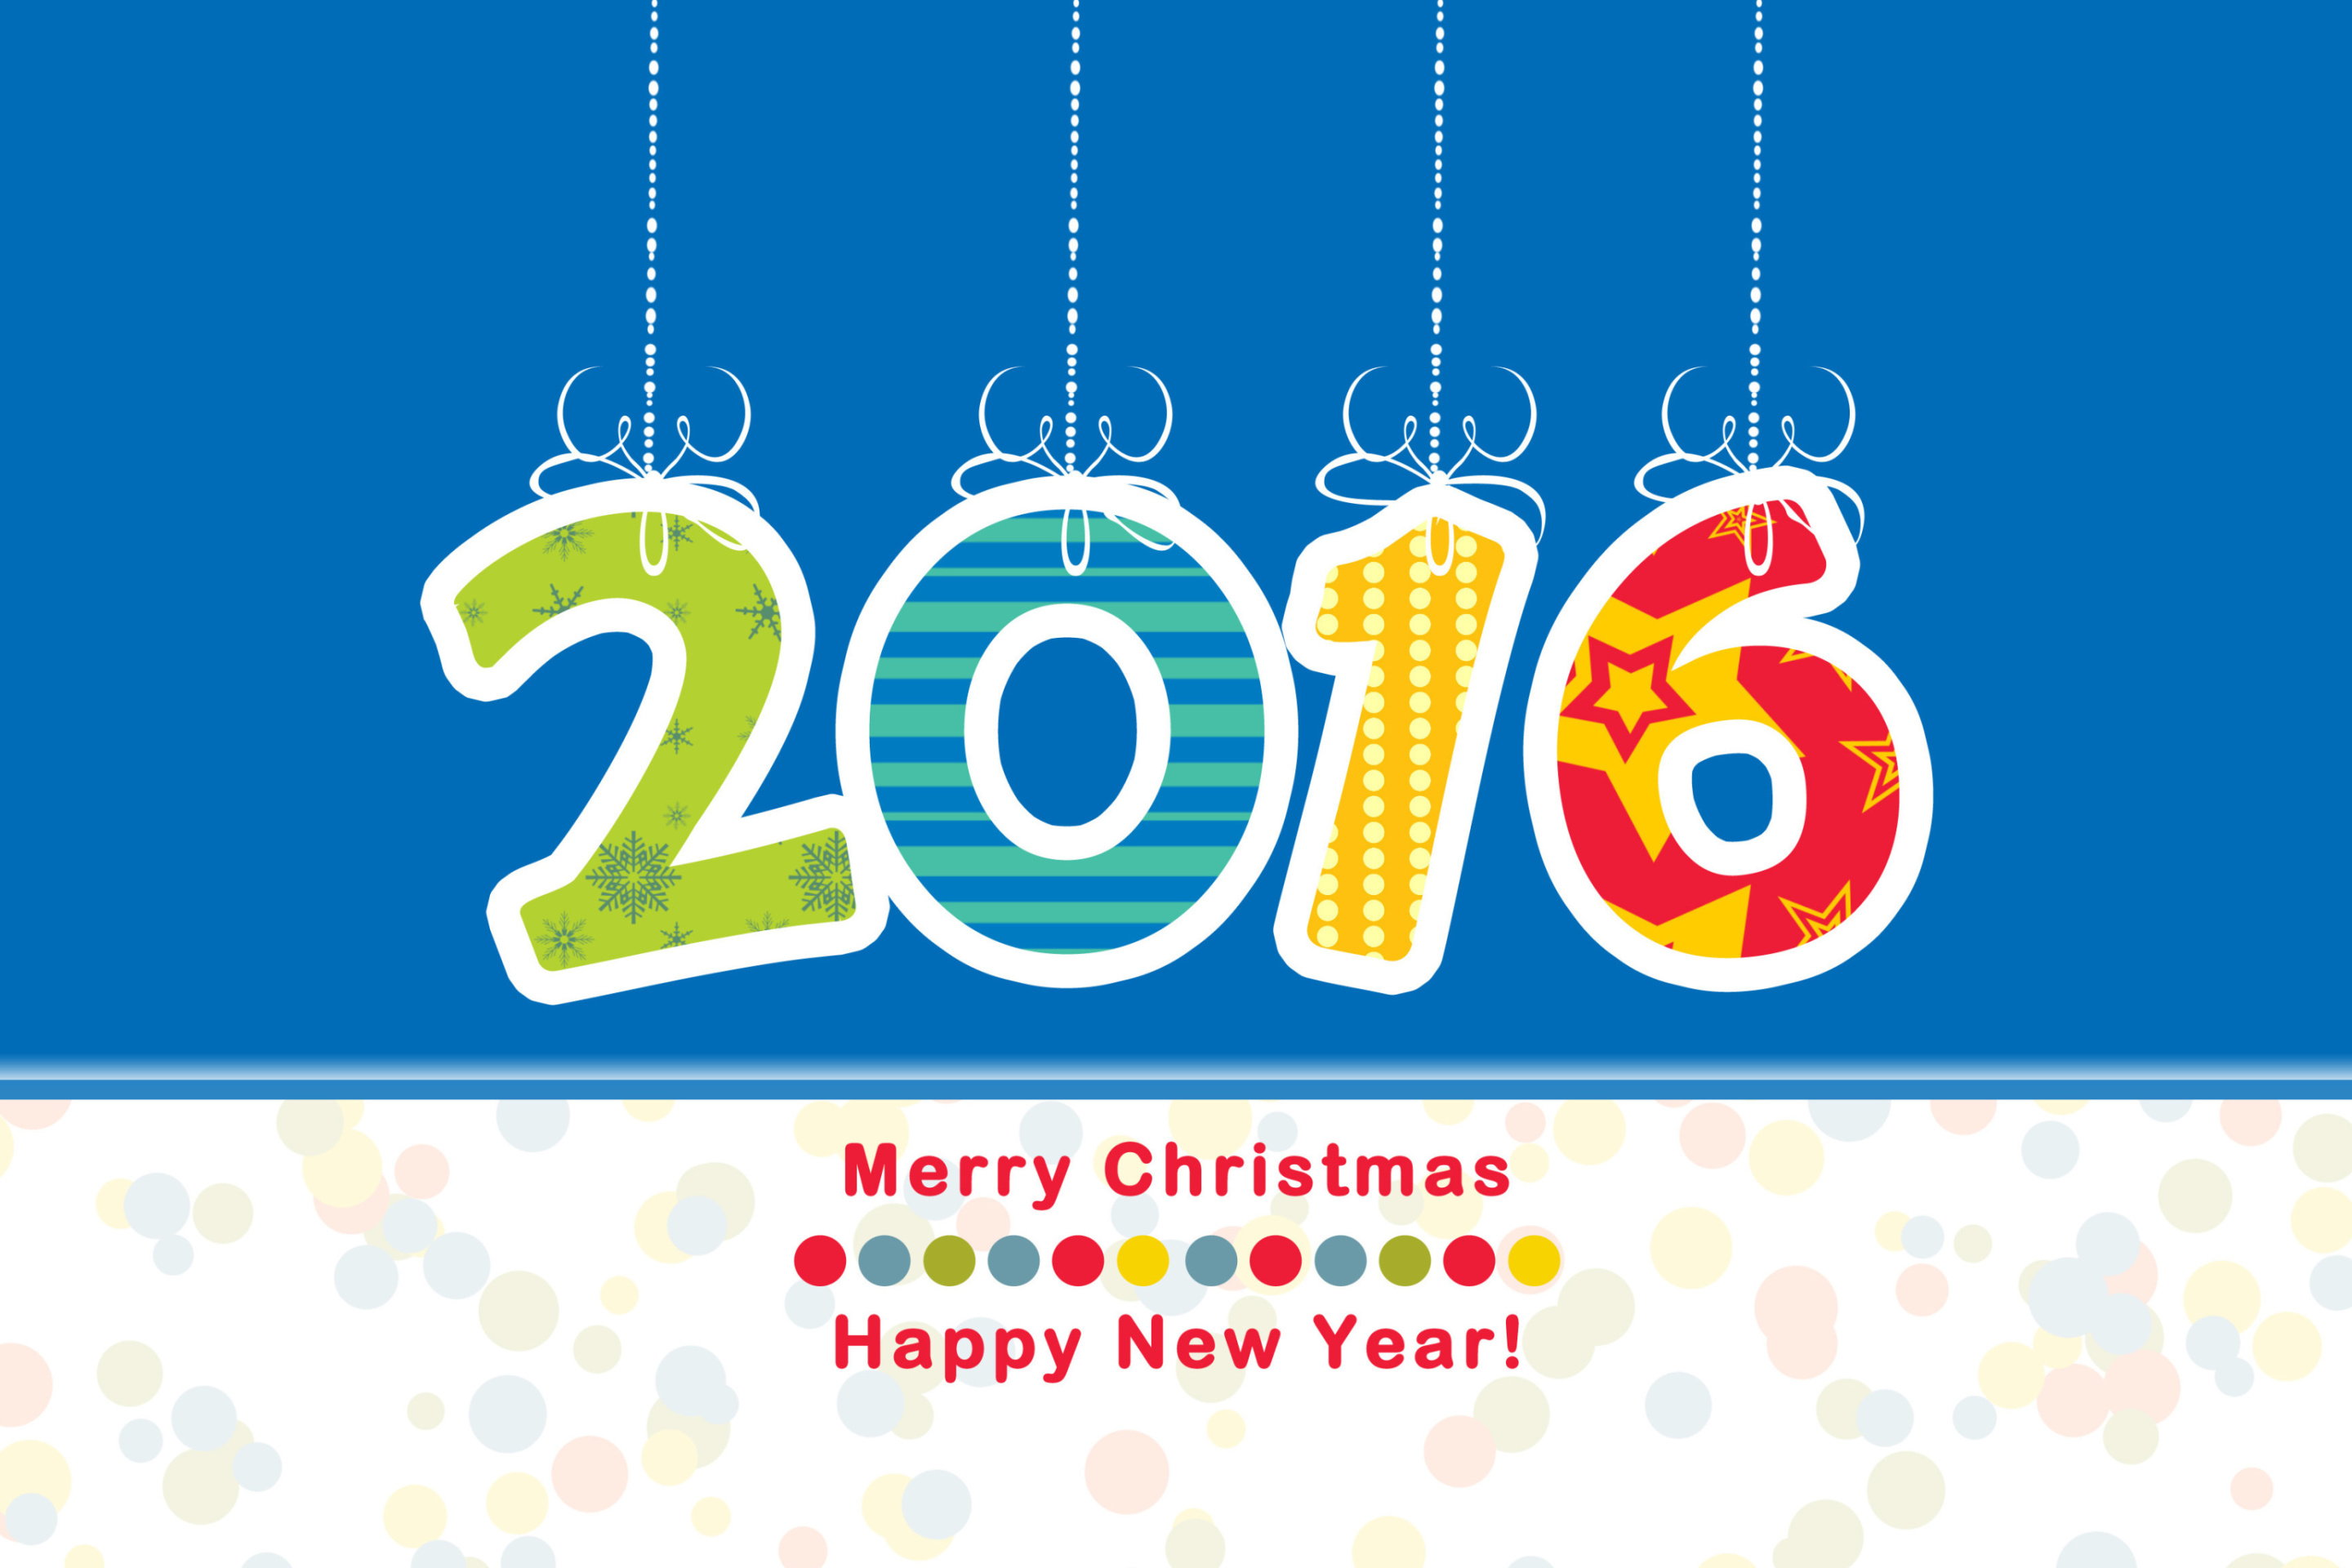 Das Colorful New Year 2016 Greetings Wallpaper 2880x1920